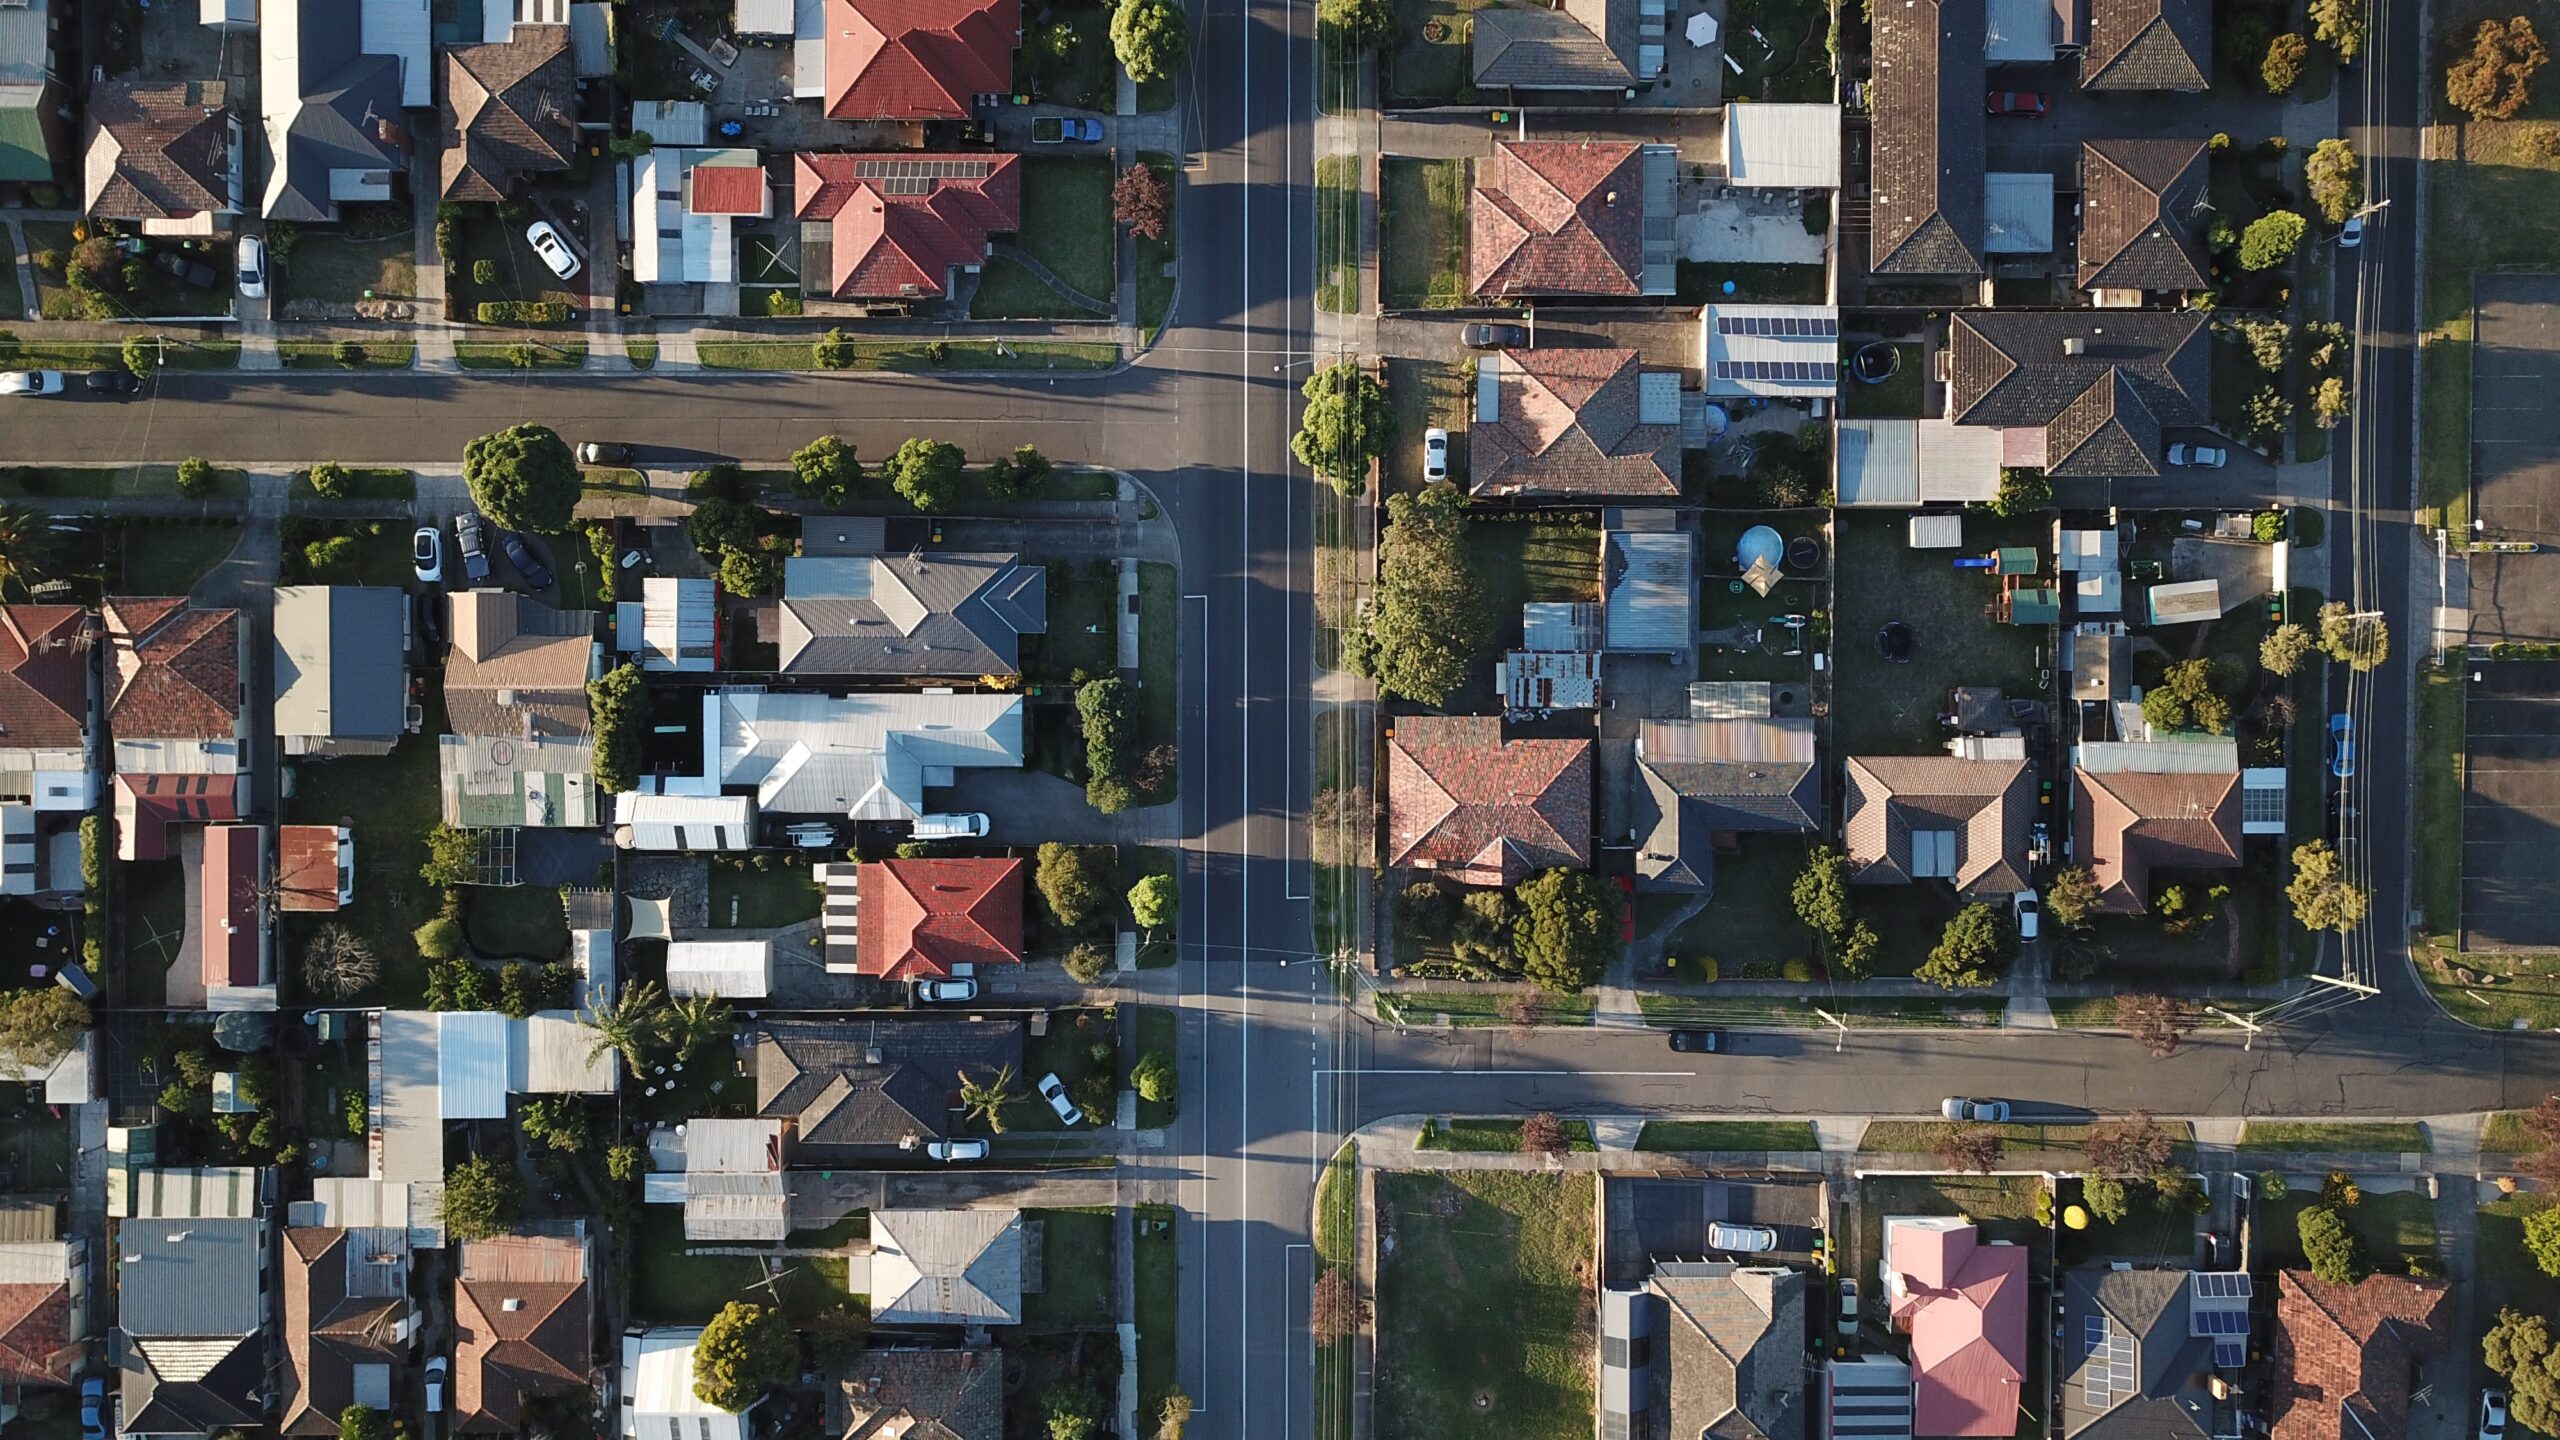 The light was fading as I was flying the Mavic back from another shoot and the symmetry of these streets caught my eye. Love me some long afternoon shadows.